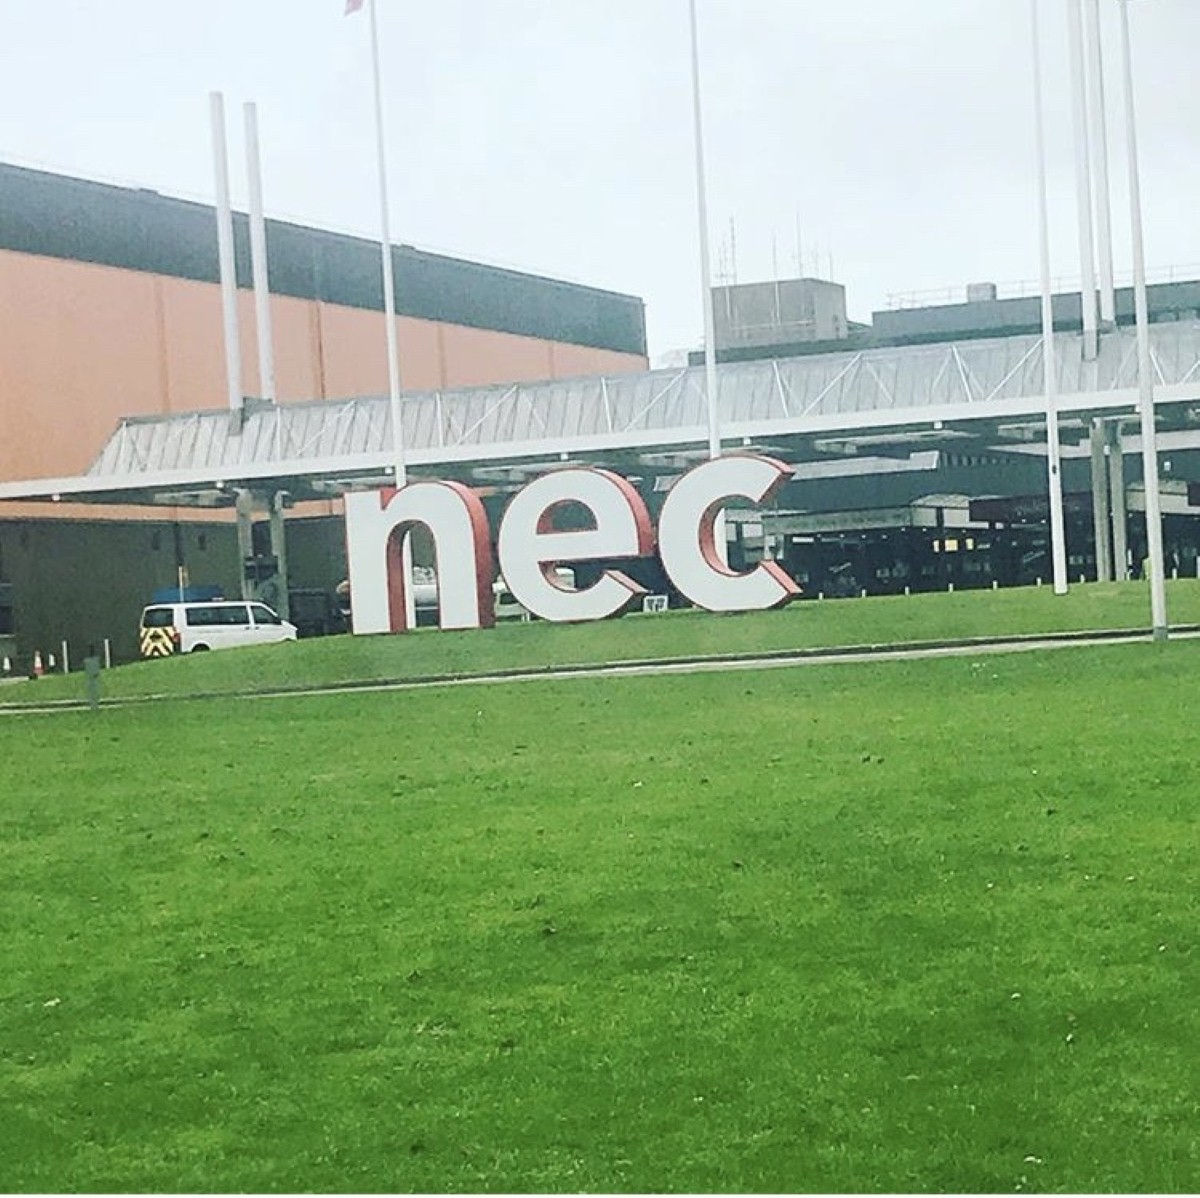 Who wants to get into the NEC show for free